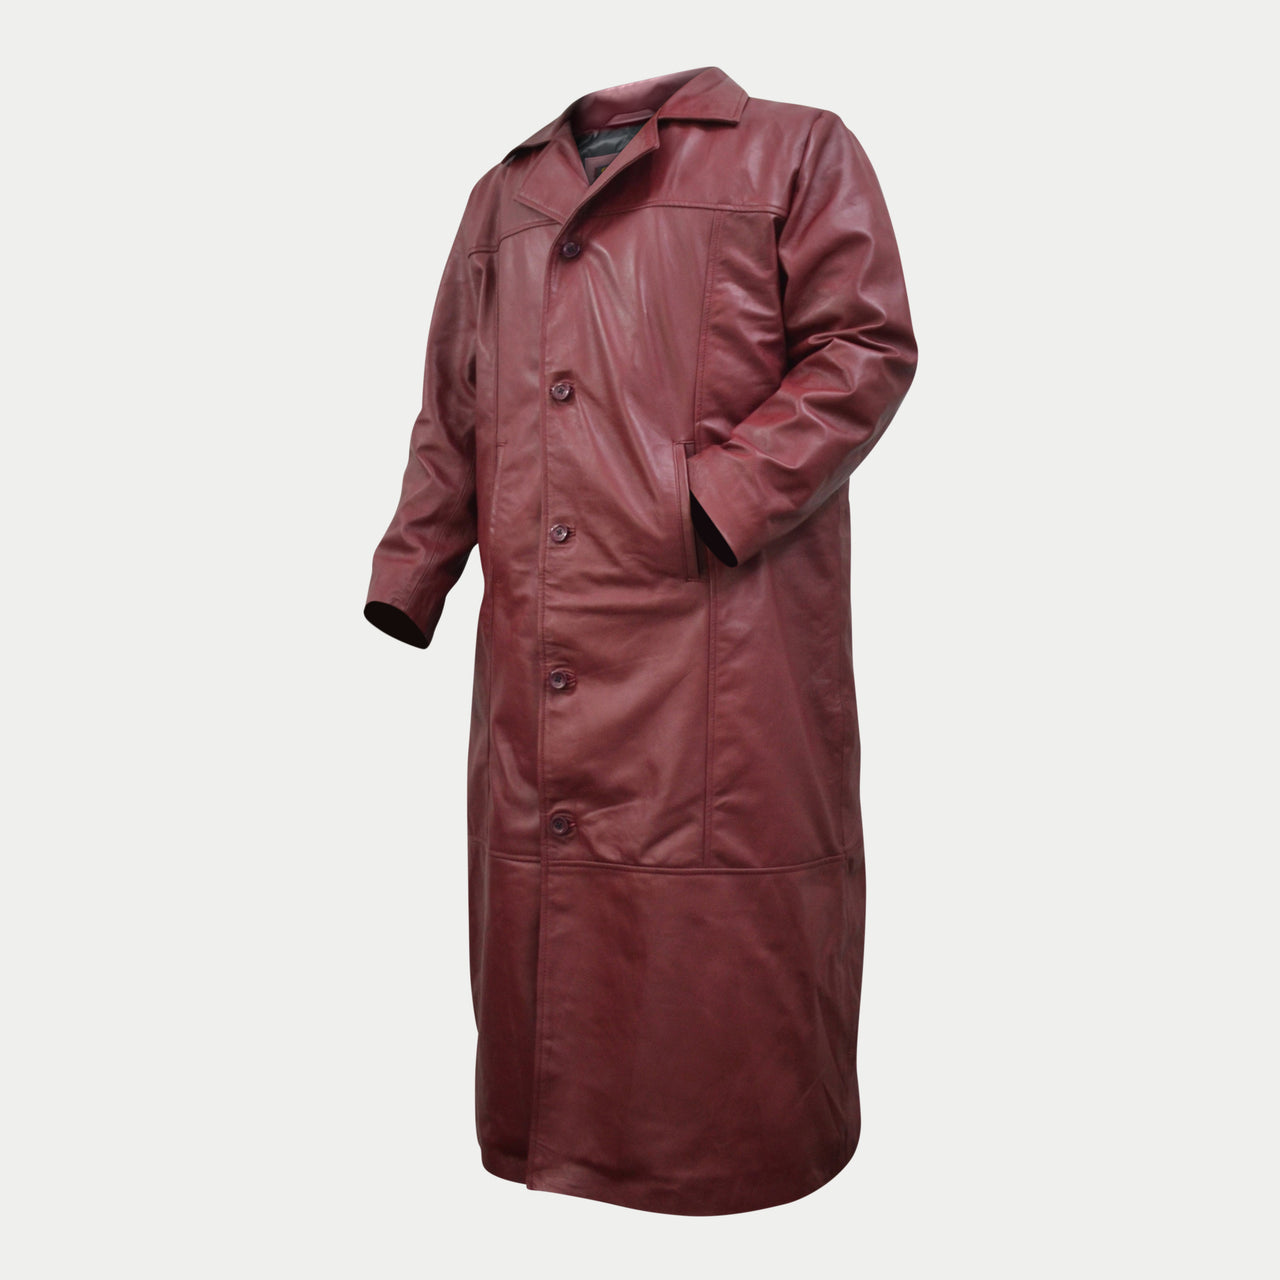 Men's Maroon Long Genuine Leather Casual Trench Coat